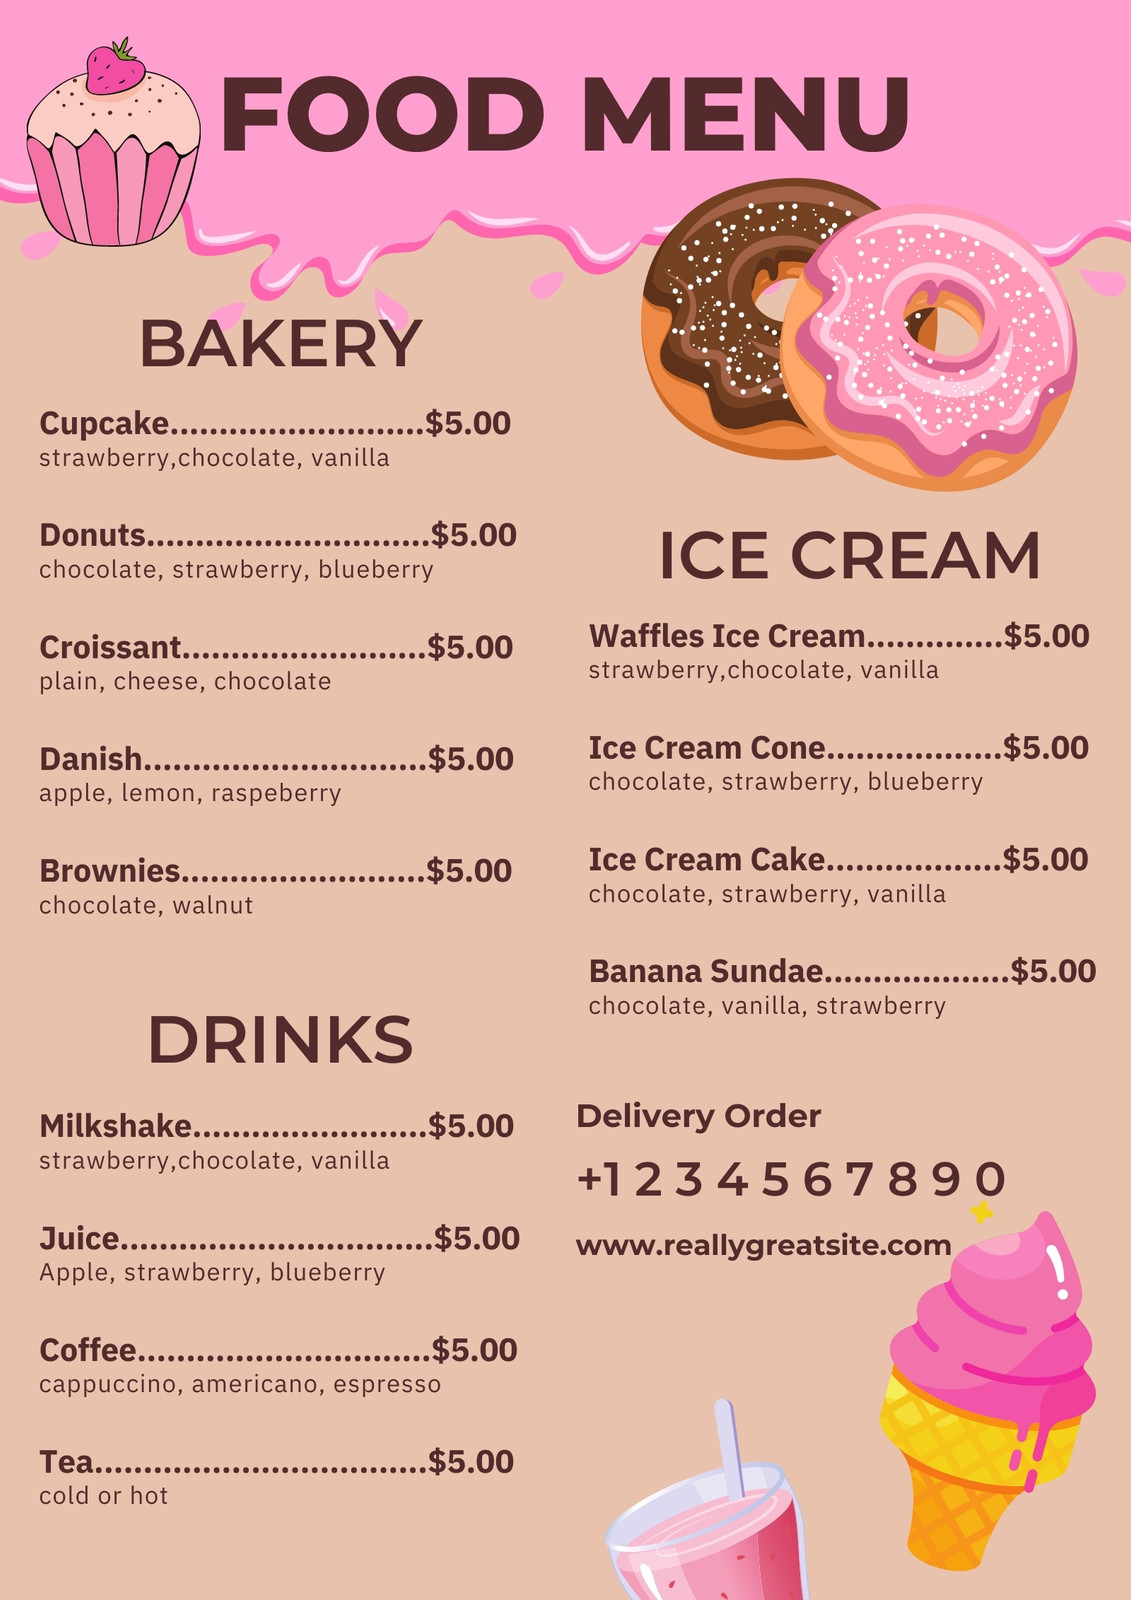 Classic Baking Bakery Menu | PSD Free Download - Pikbest